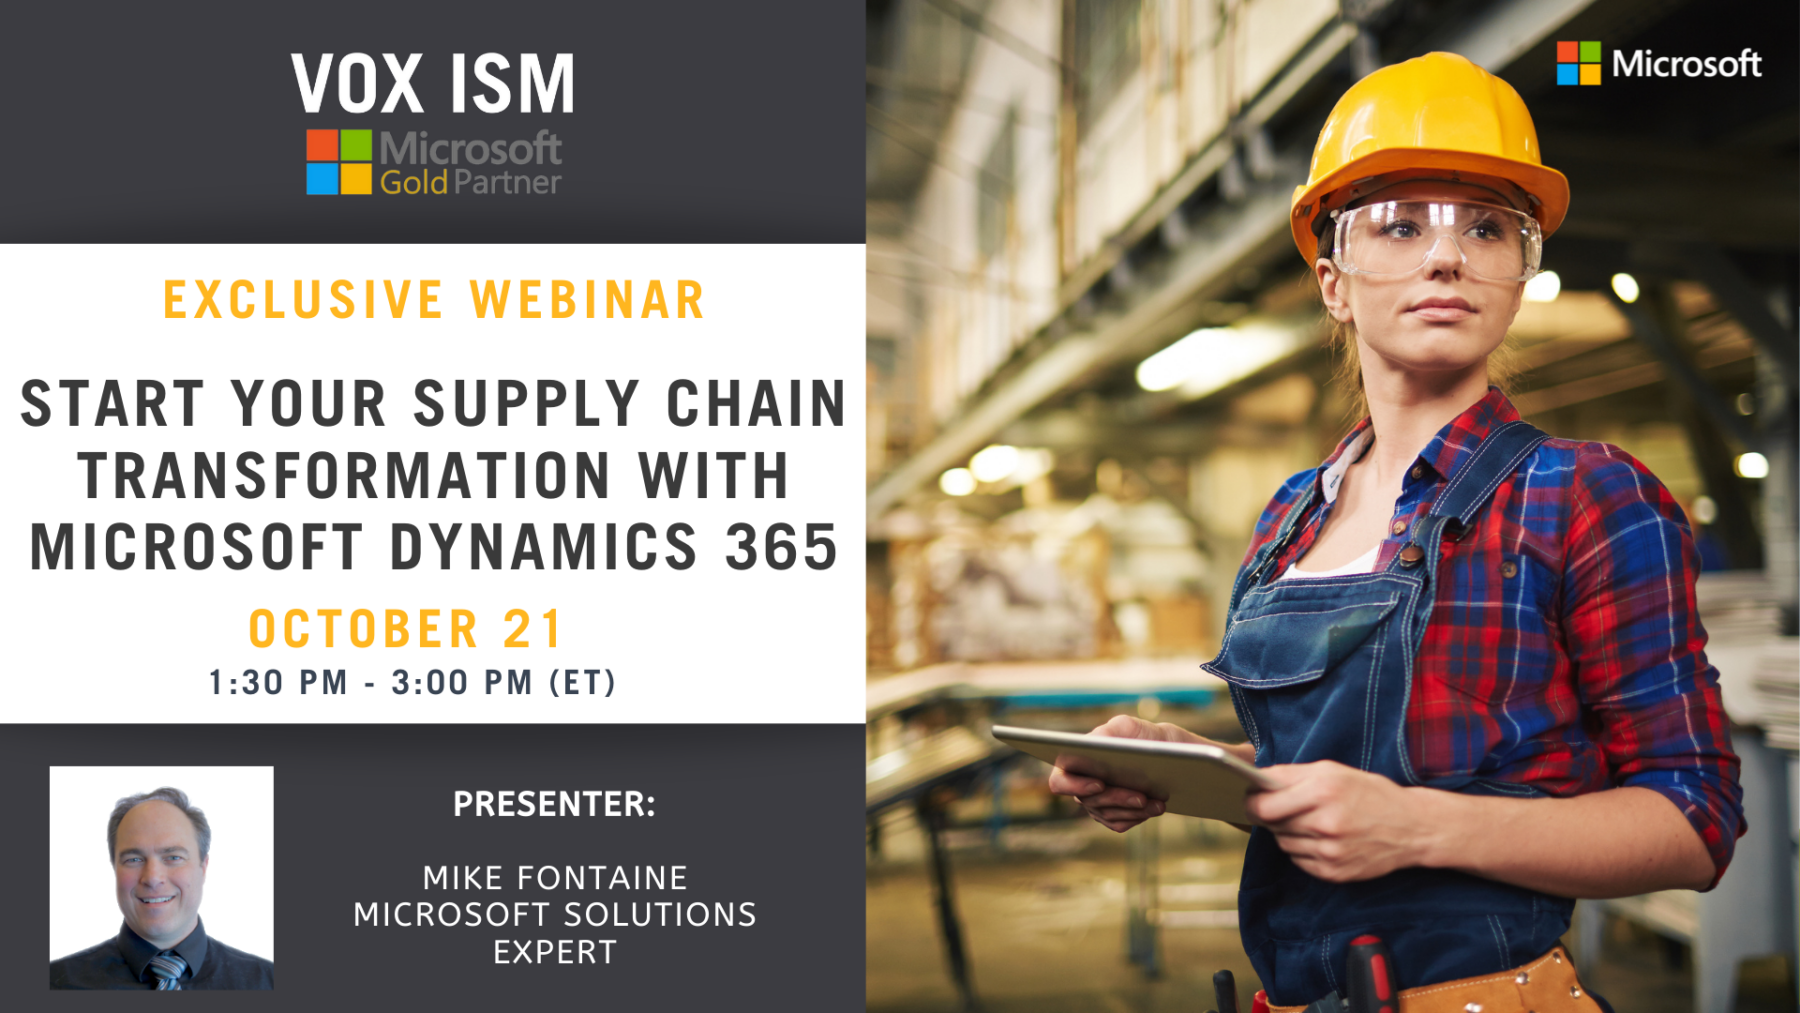 Start your supply chain transformation with Microsoft Dynamics 365